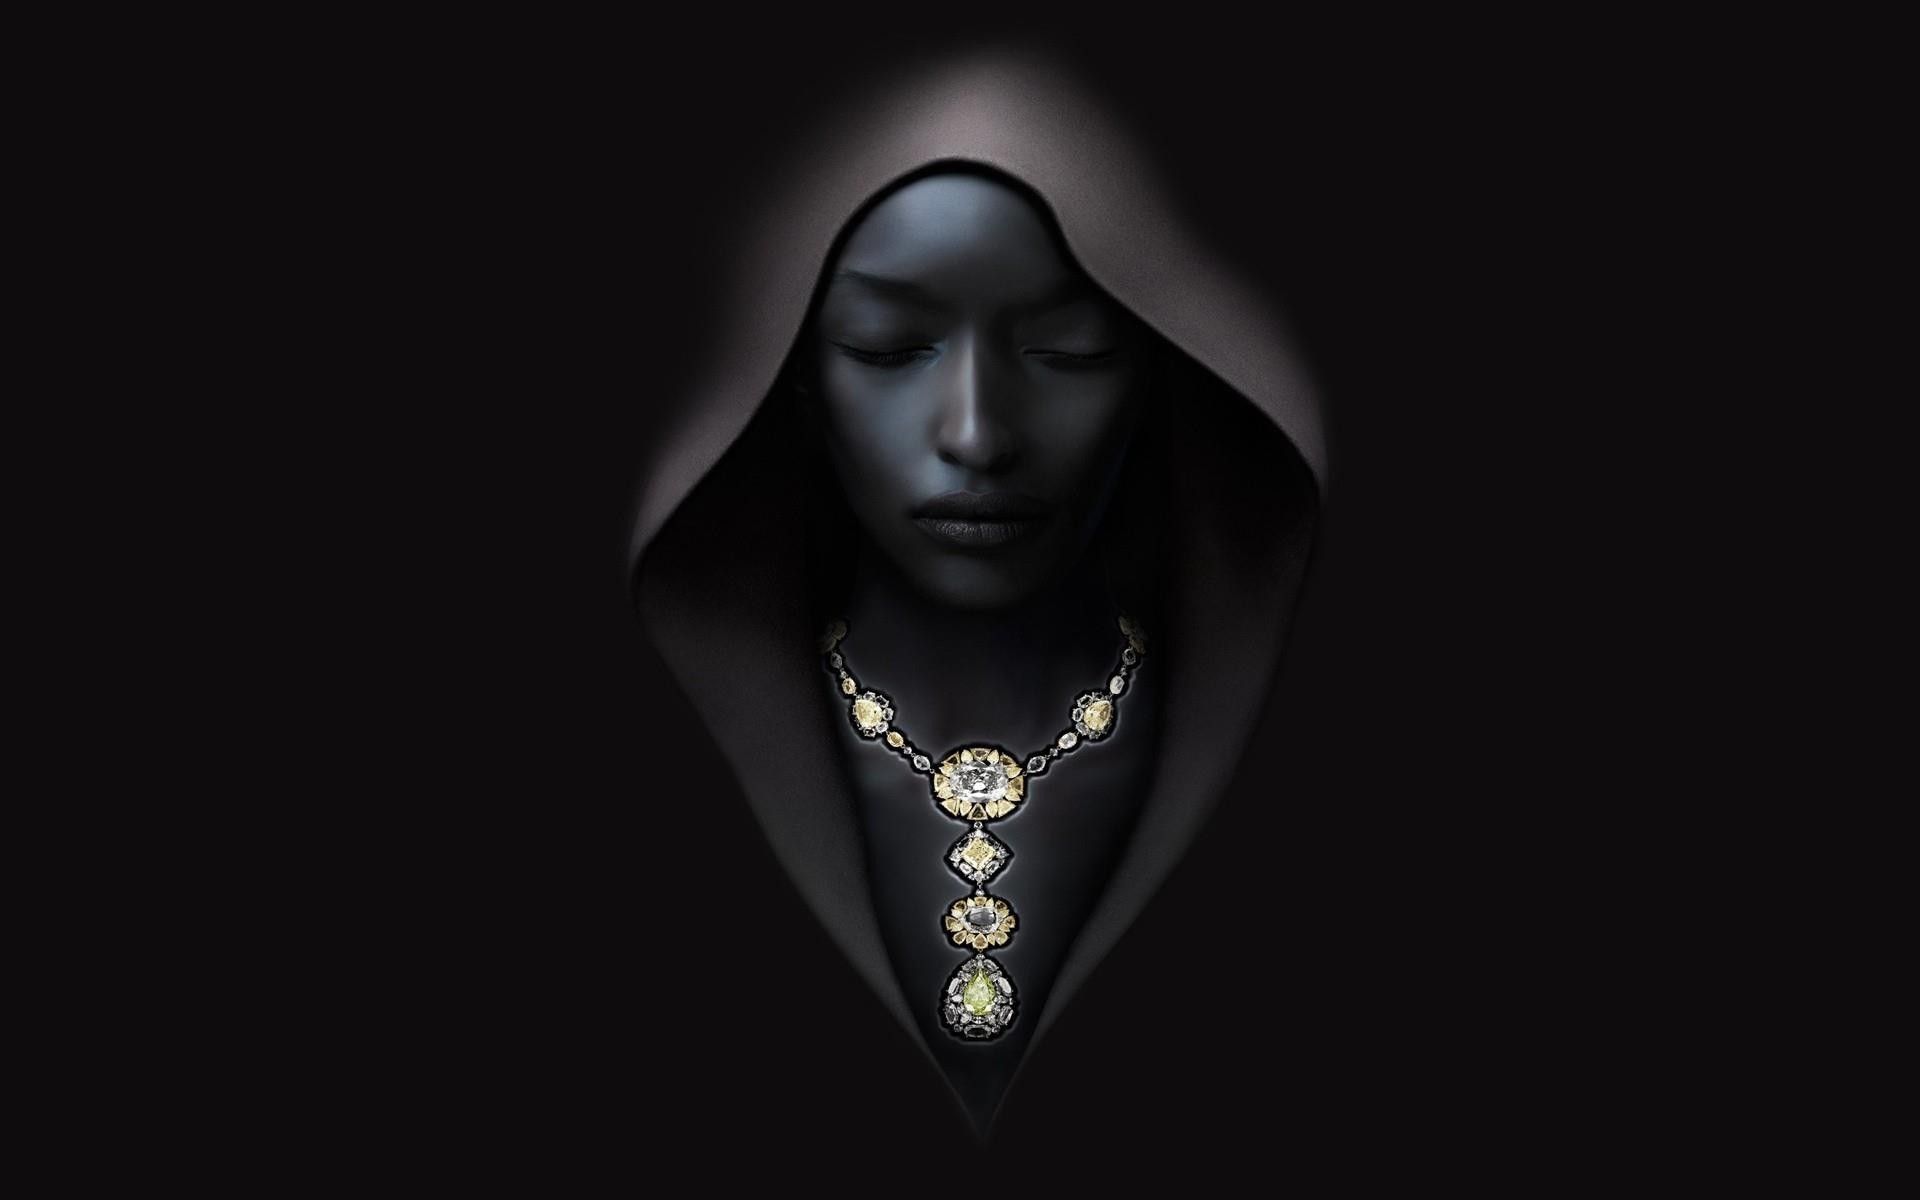 A girl in a hood on a black background wallpaper and image, picture, photo